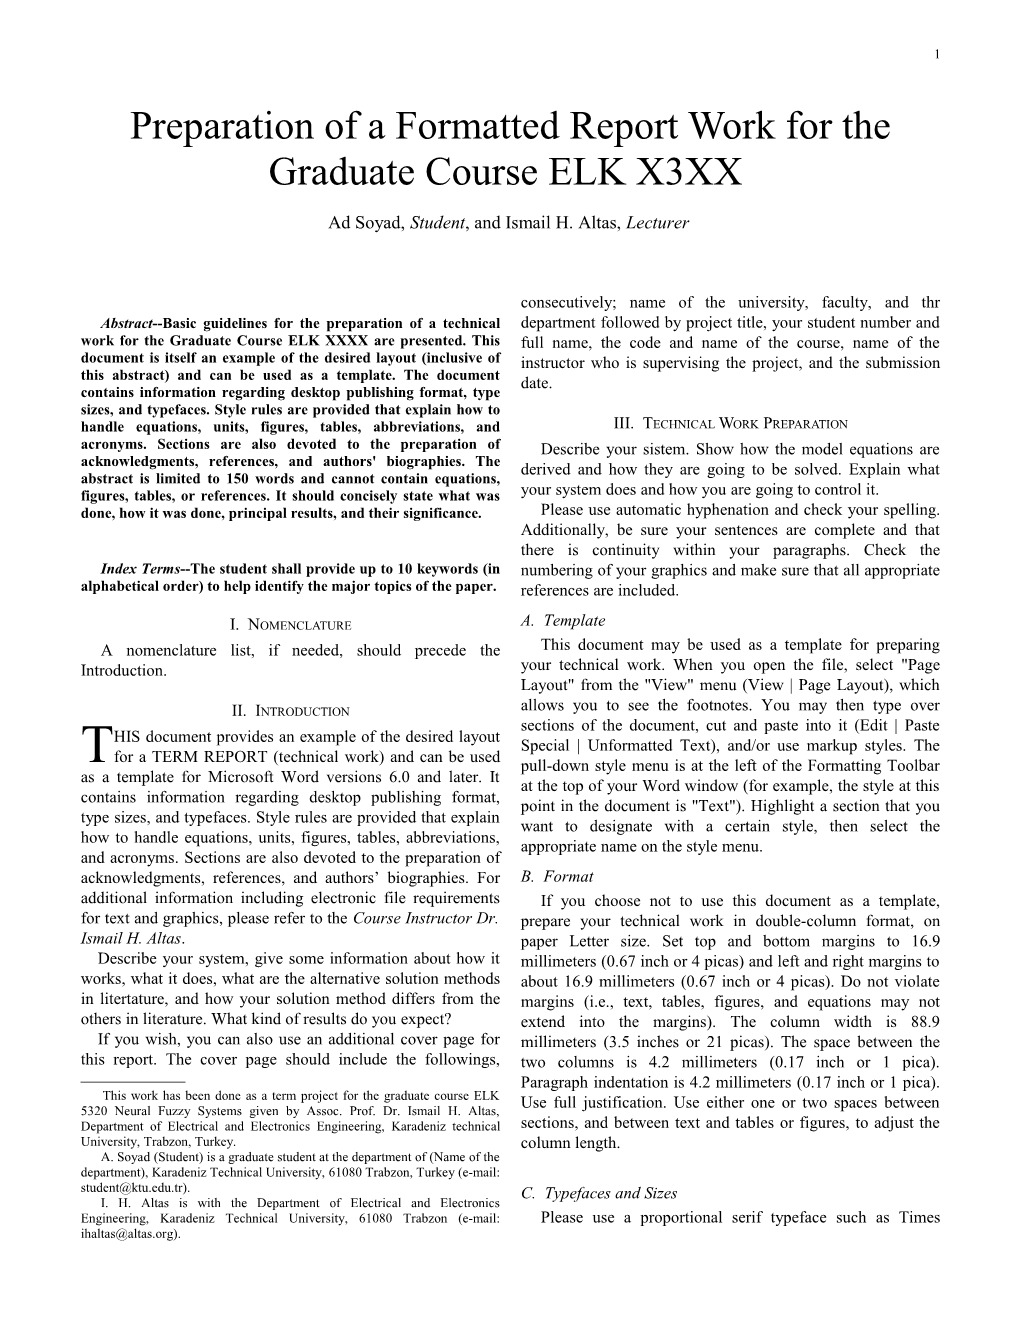 Preparation of a Formatted Report Work for the Graduate Course ELK X3XX